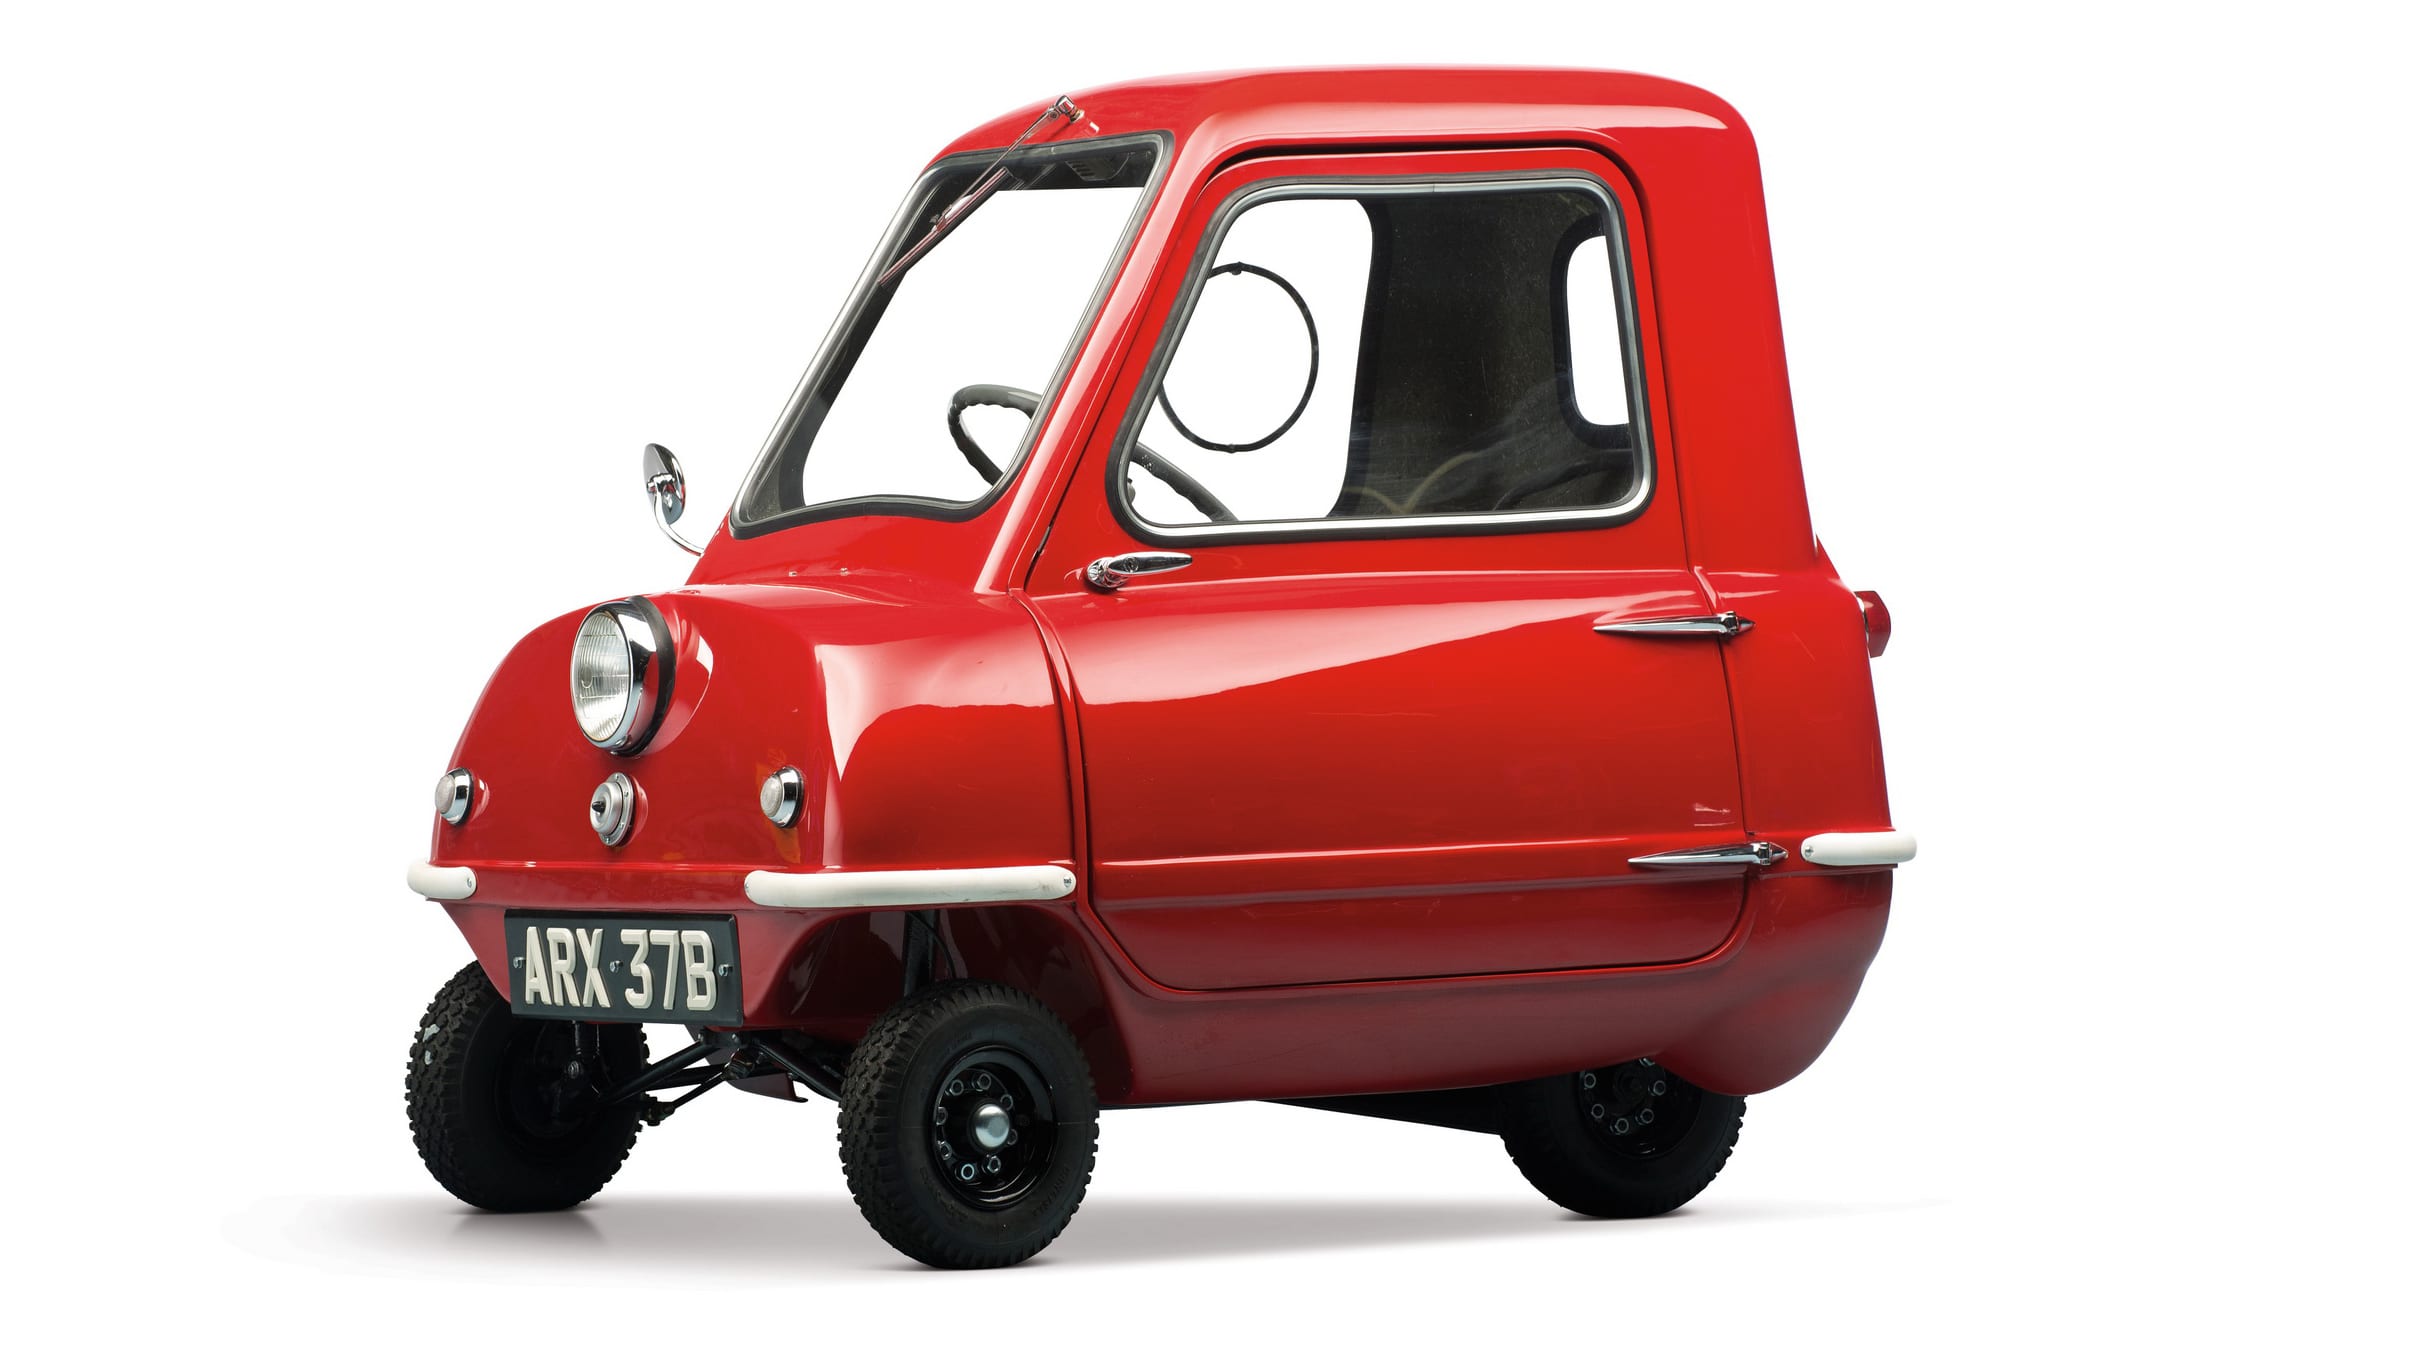 The smallest car ever made - Drive